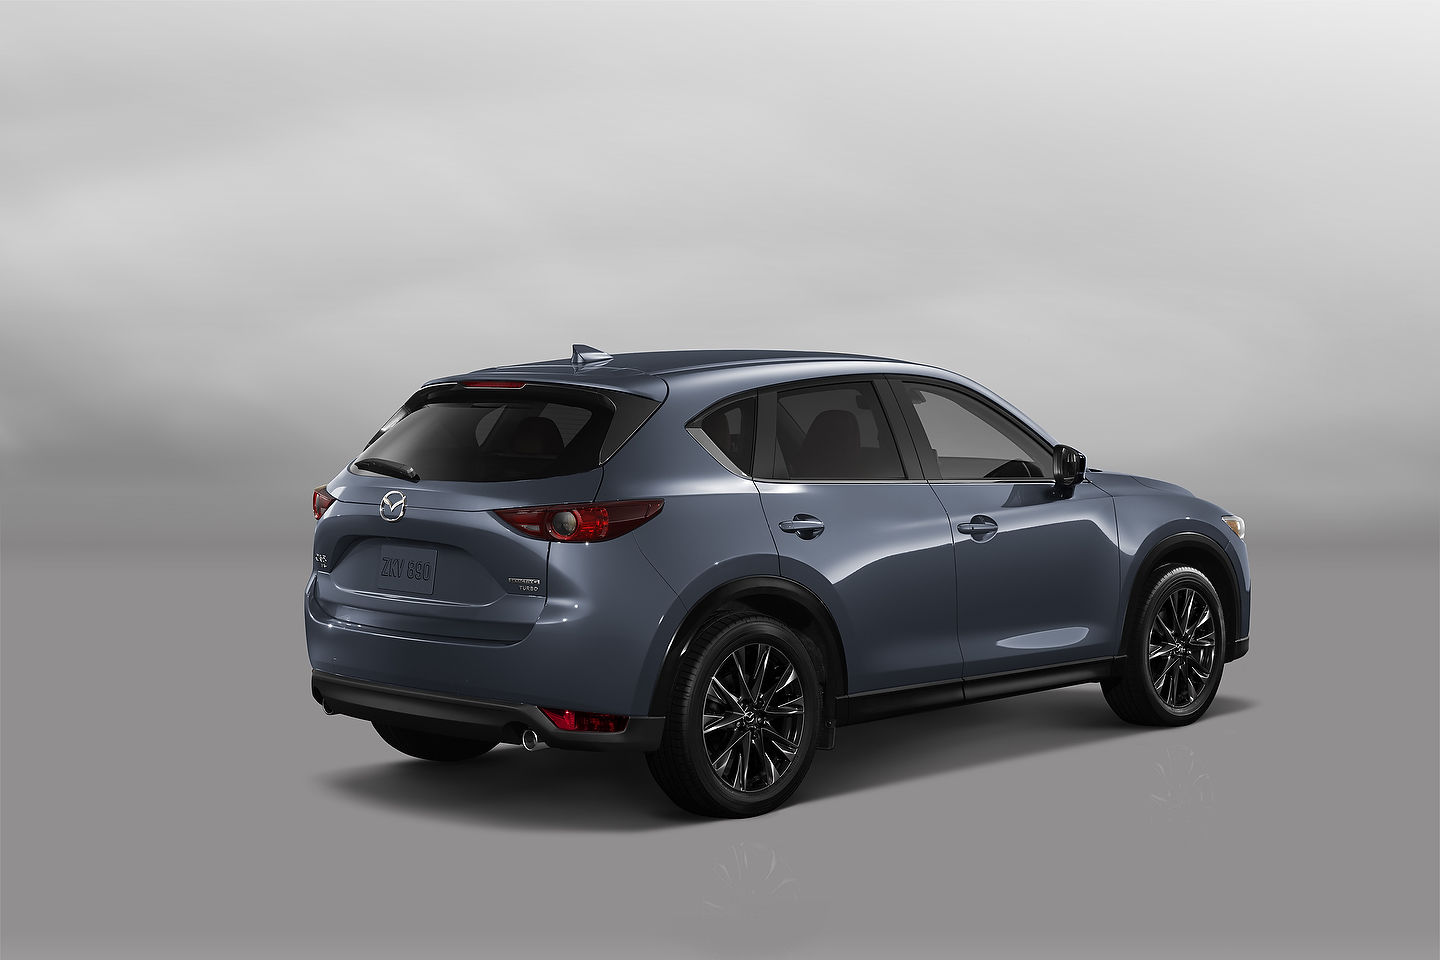 2021.5 Mazda CX-5 Pricing, Trims, and Features